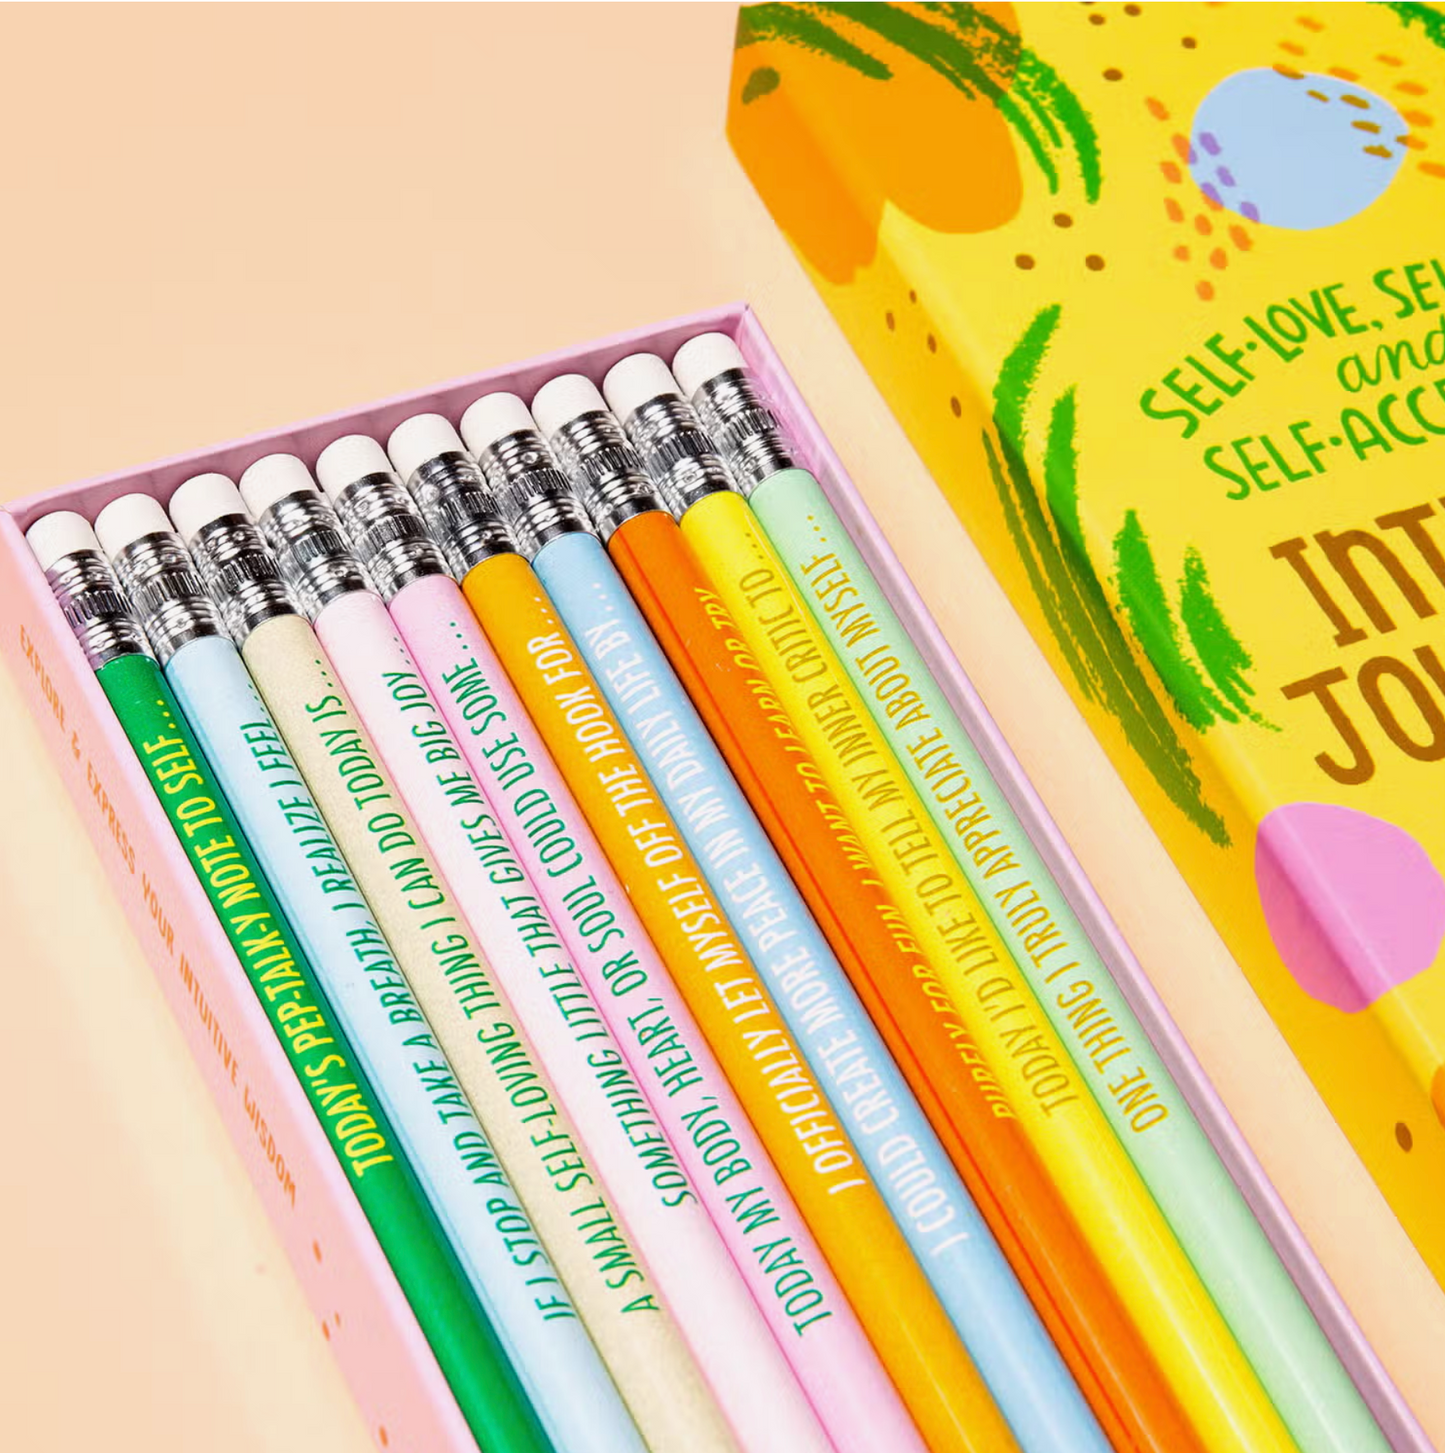 Self-Love, Self-Care and Self-Acceptance Pencil Set - 10 pack